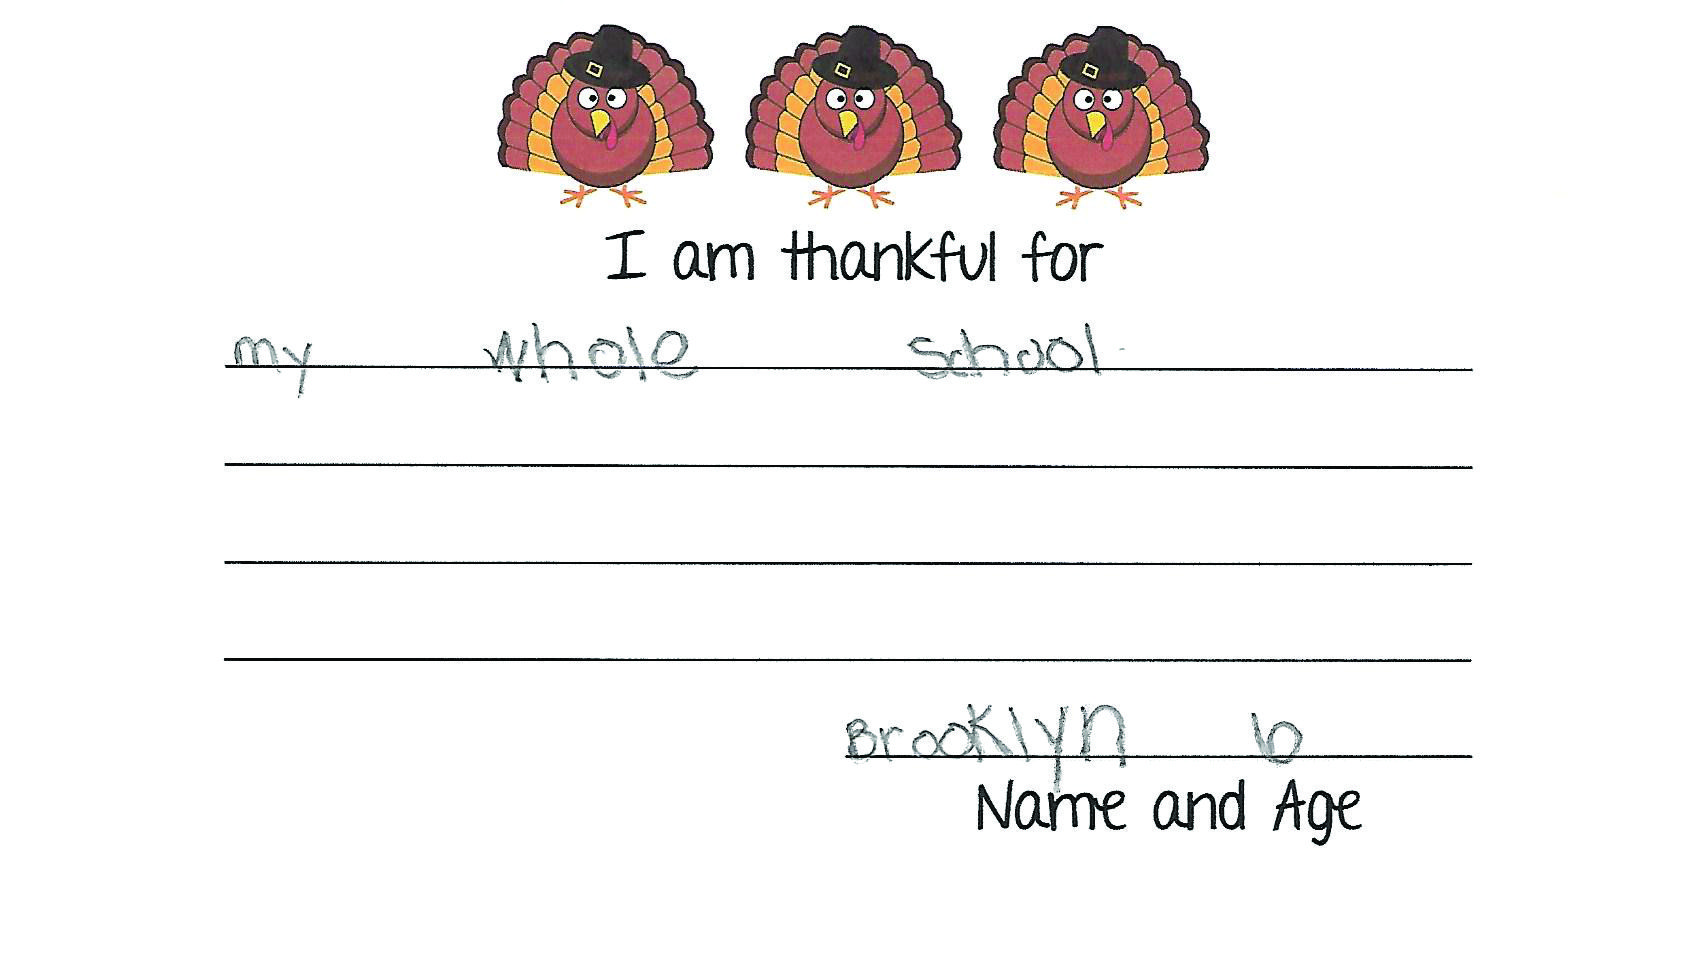 I am thankful for …